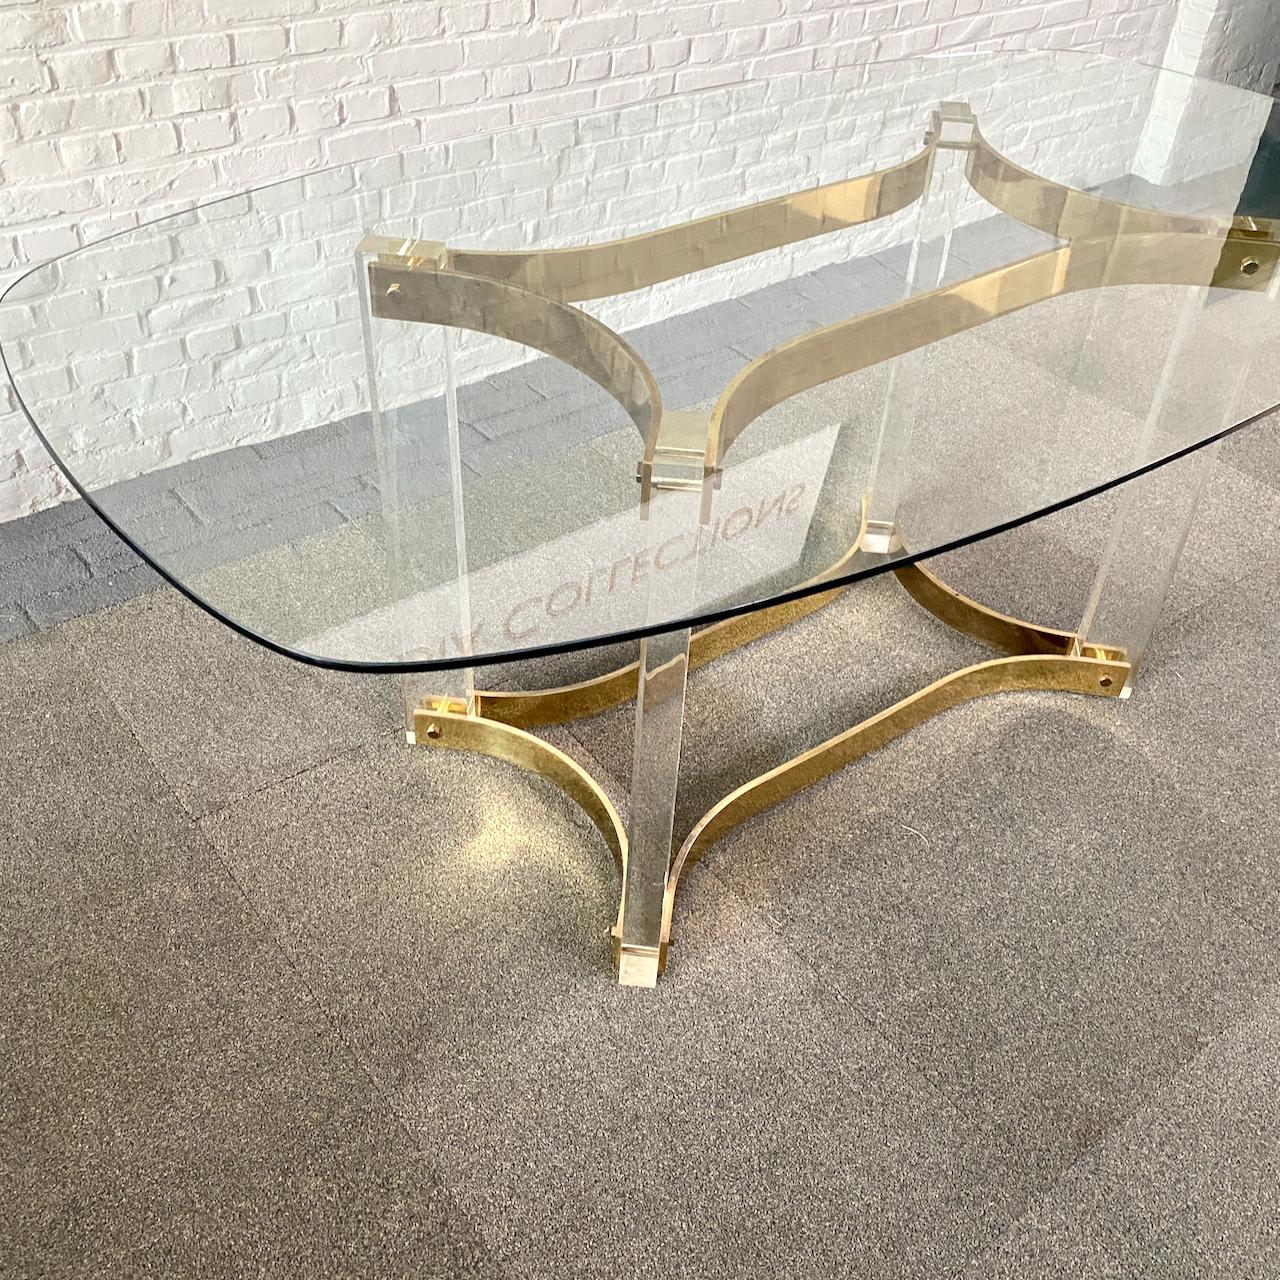 ALESSANDRO ALBRIZZI DINING TABLE - LUCITE & BRASS - 1970'S

Exquisite dining room table by Italian Baron Alessandro Albrizzi (1934-1994).
The 4 thick lucite columns are joined together with solid brass curved panels;
supporting a clear glass